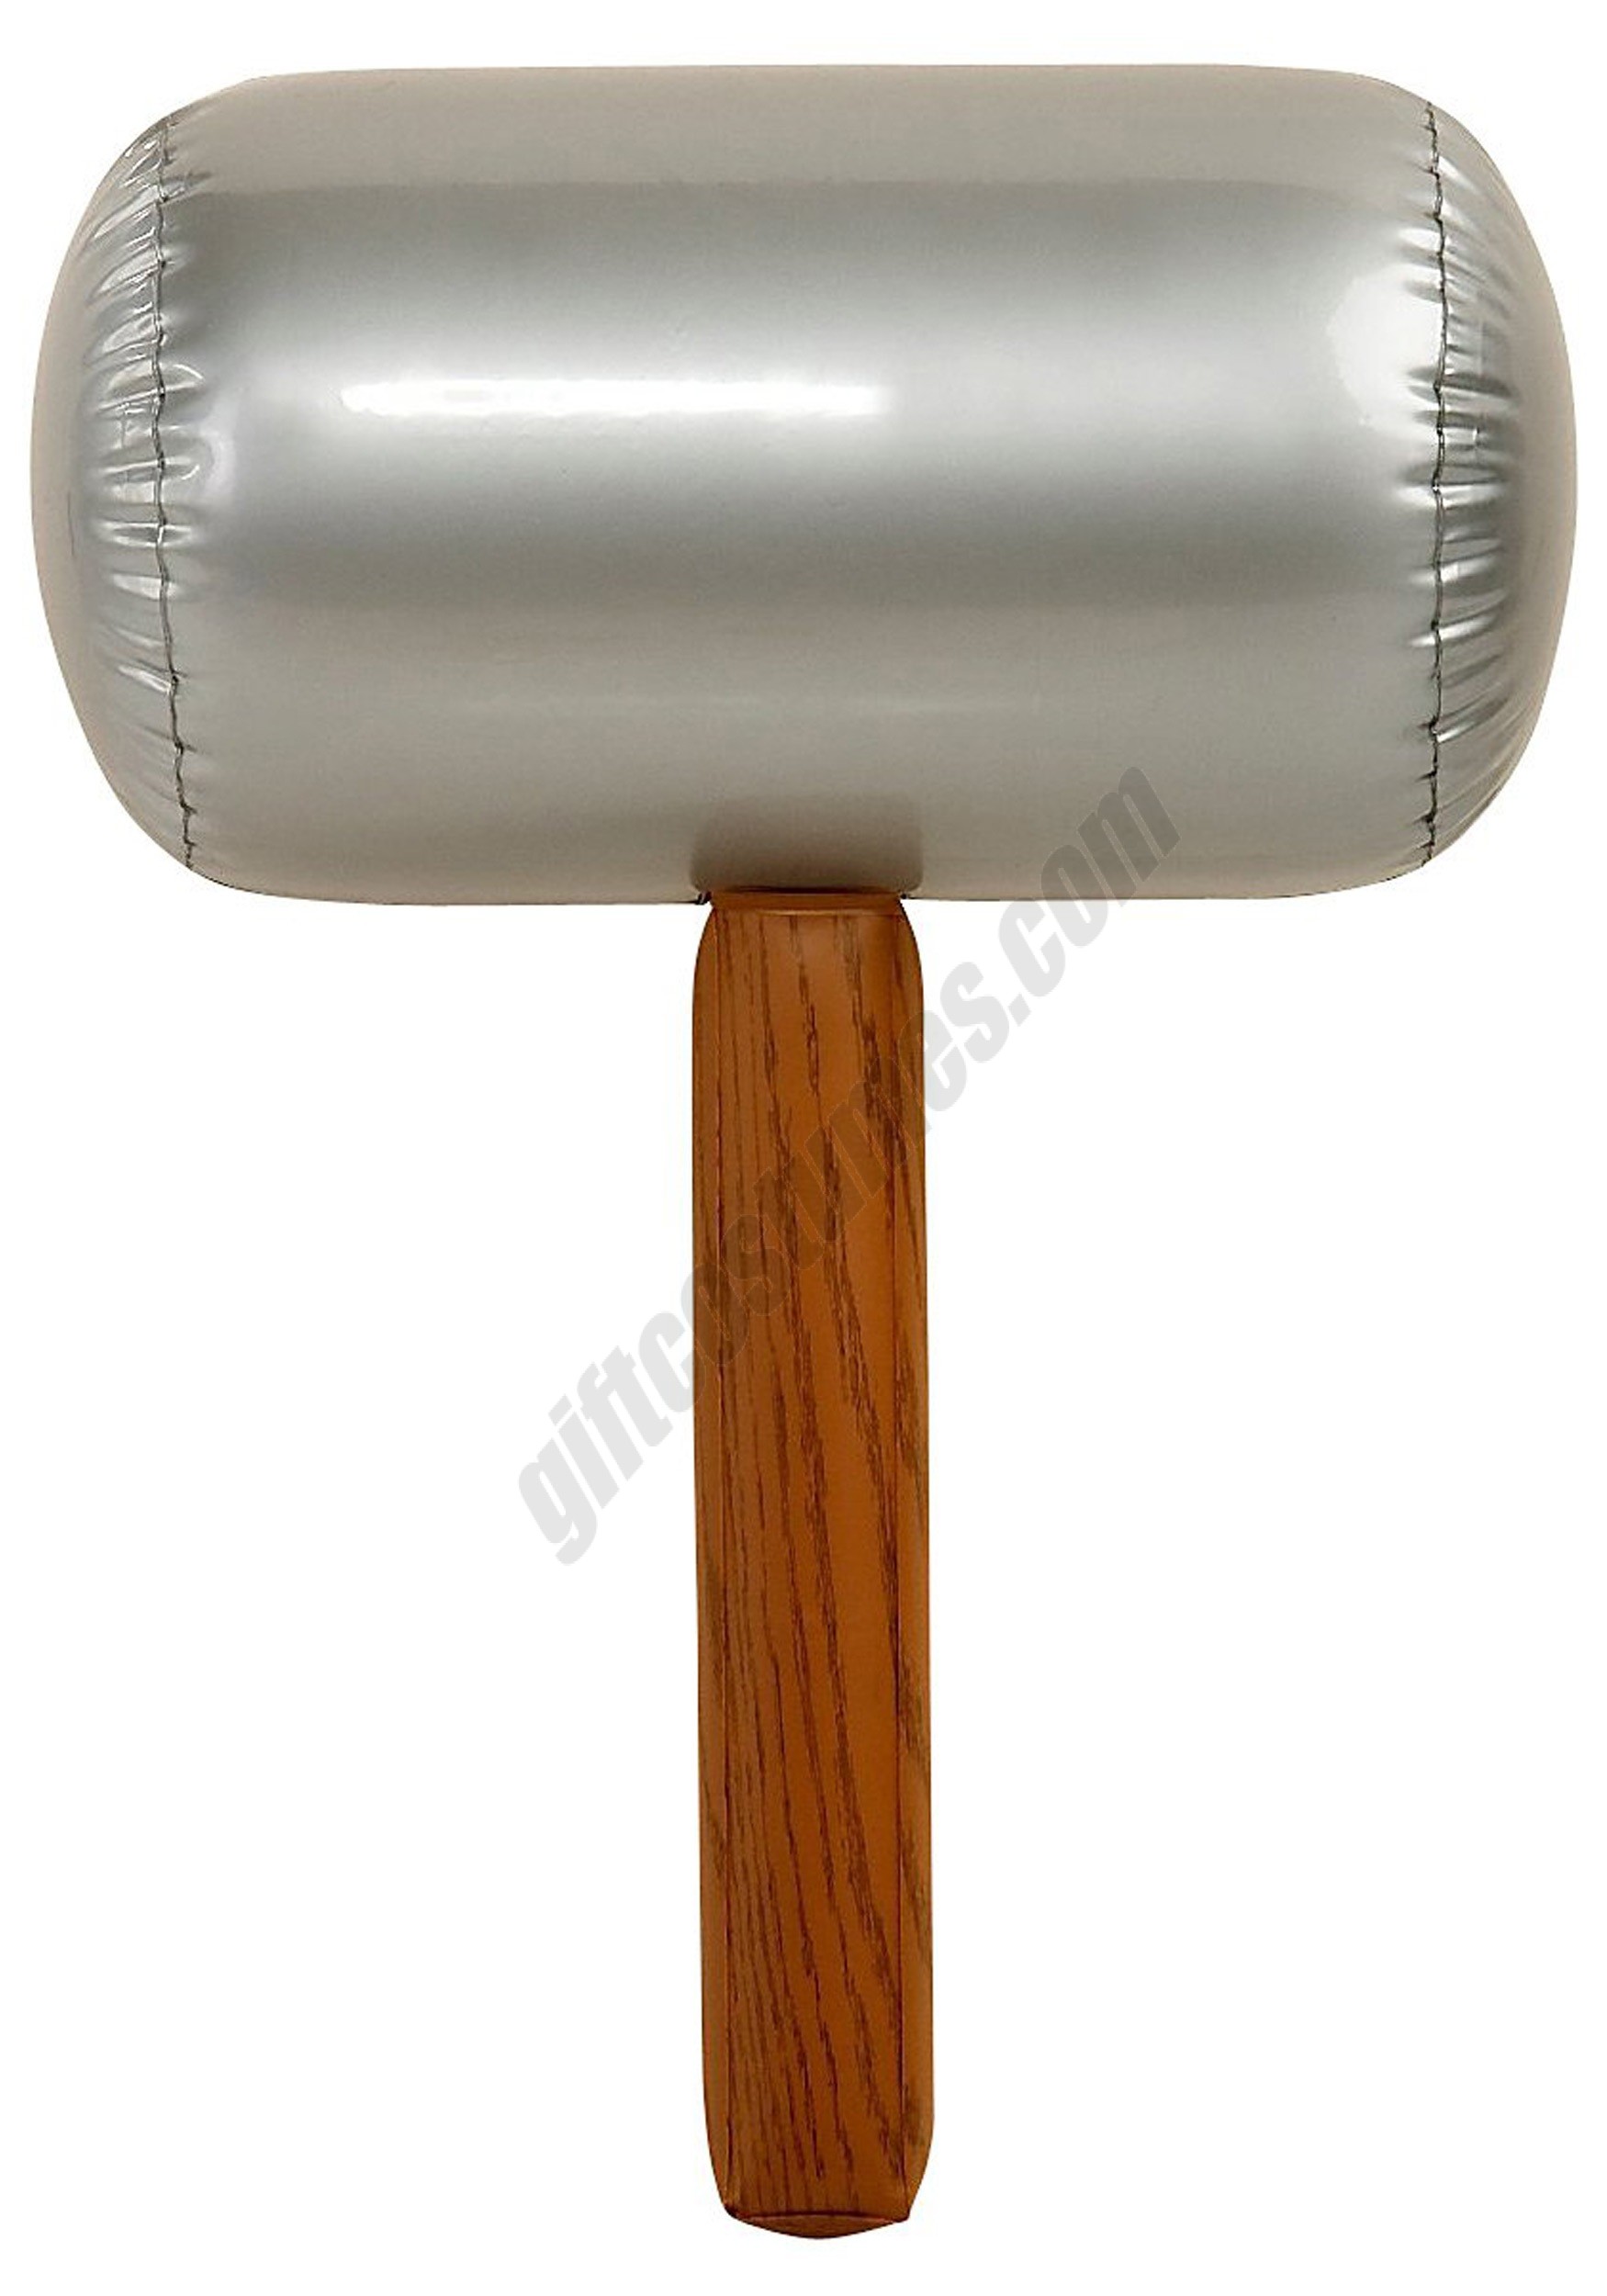 Inflatable Mallet Promotions - Inflatable Mallet Promotions